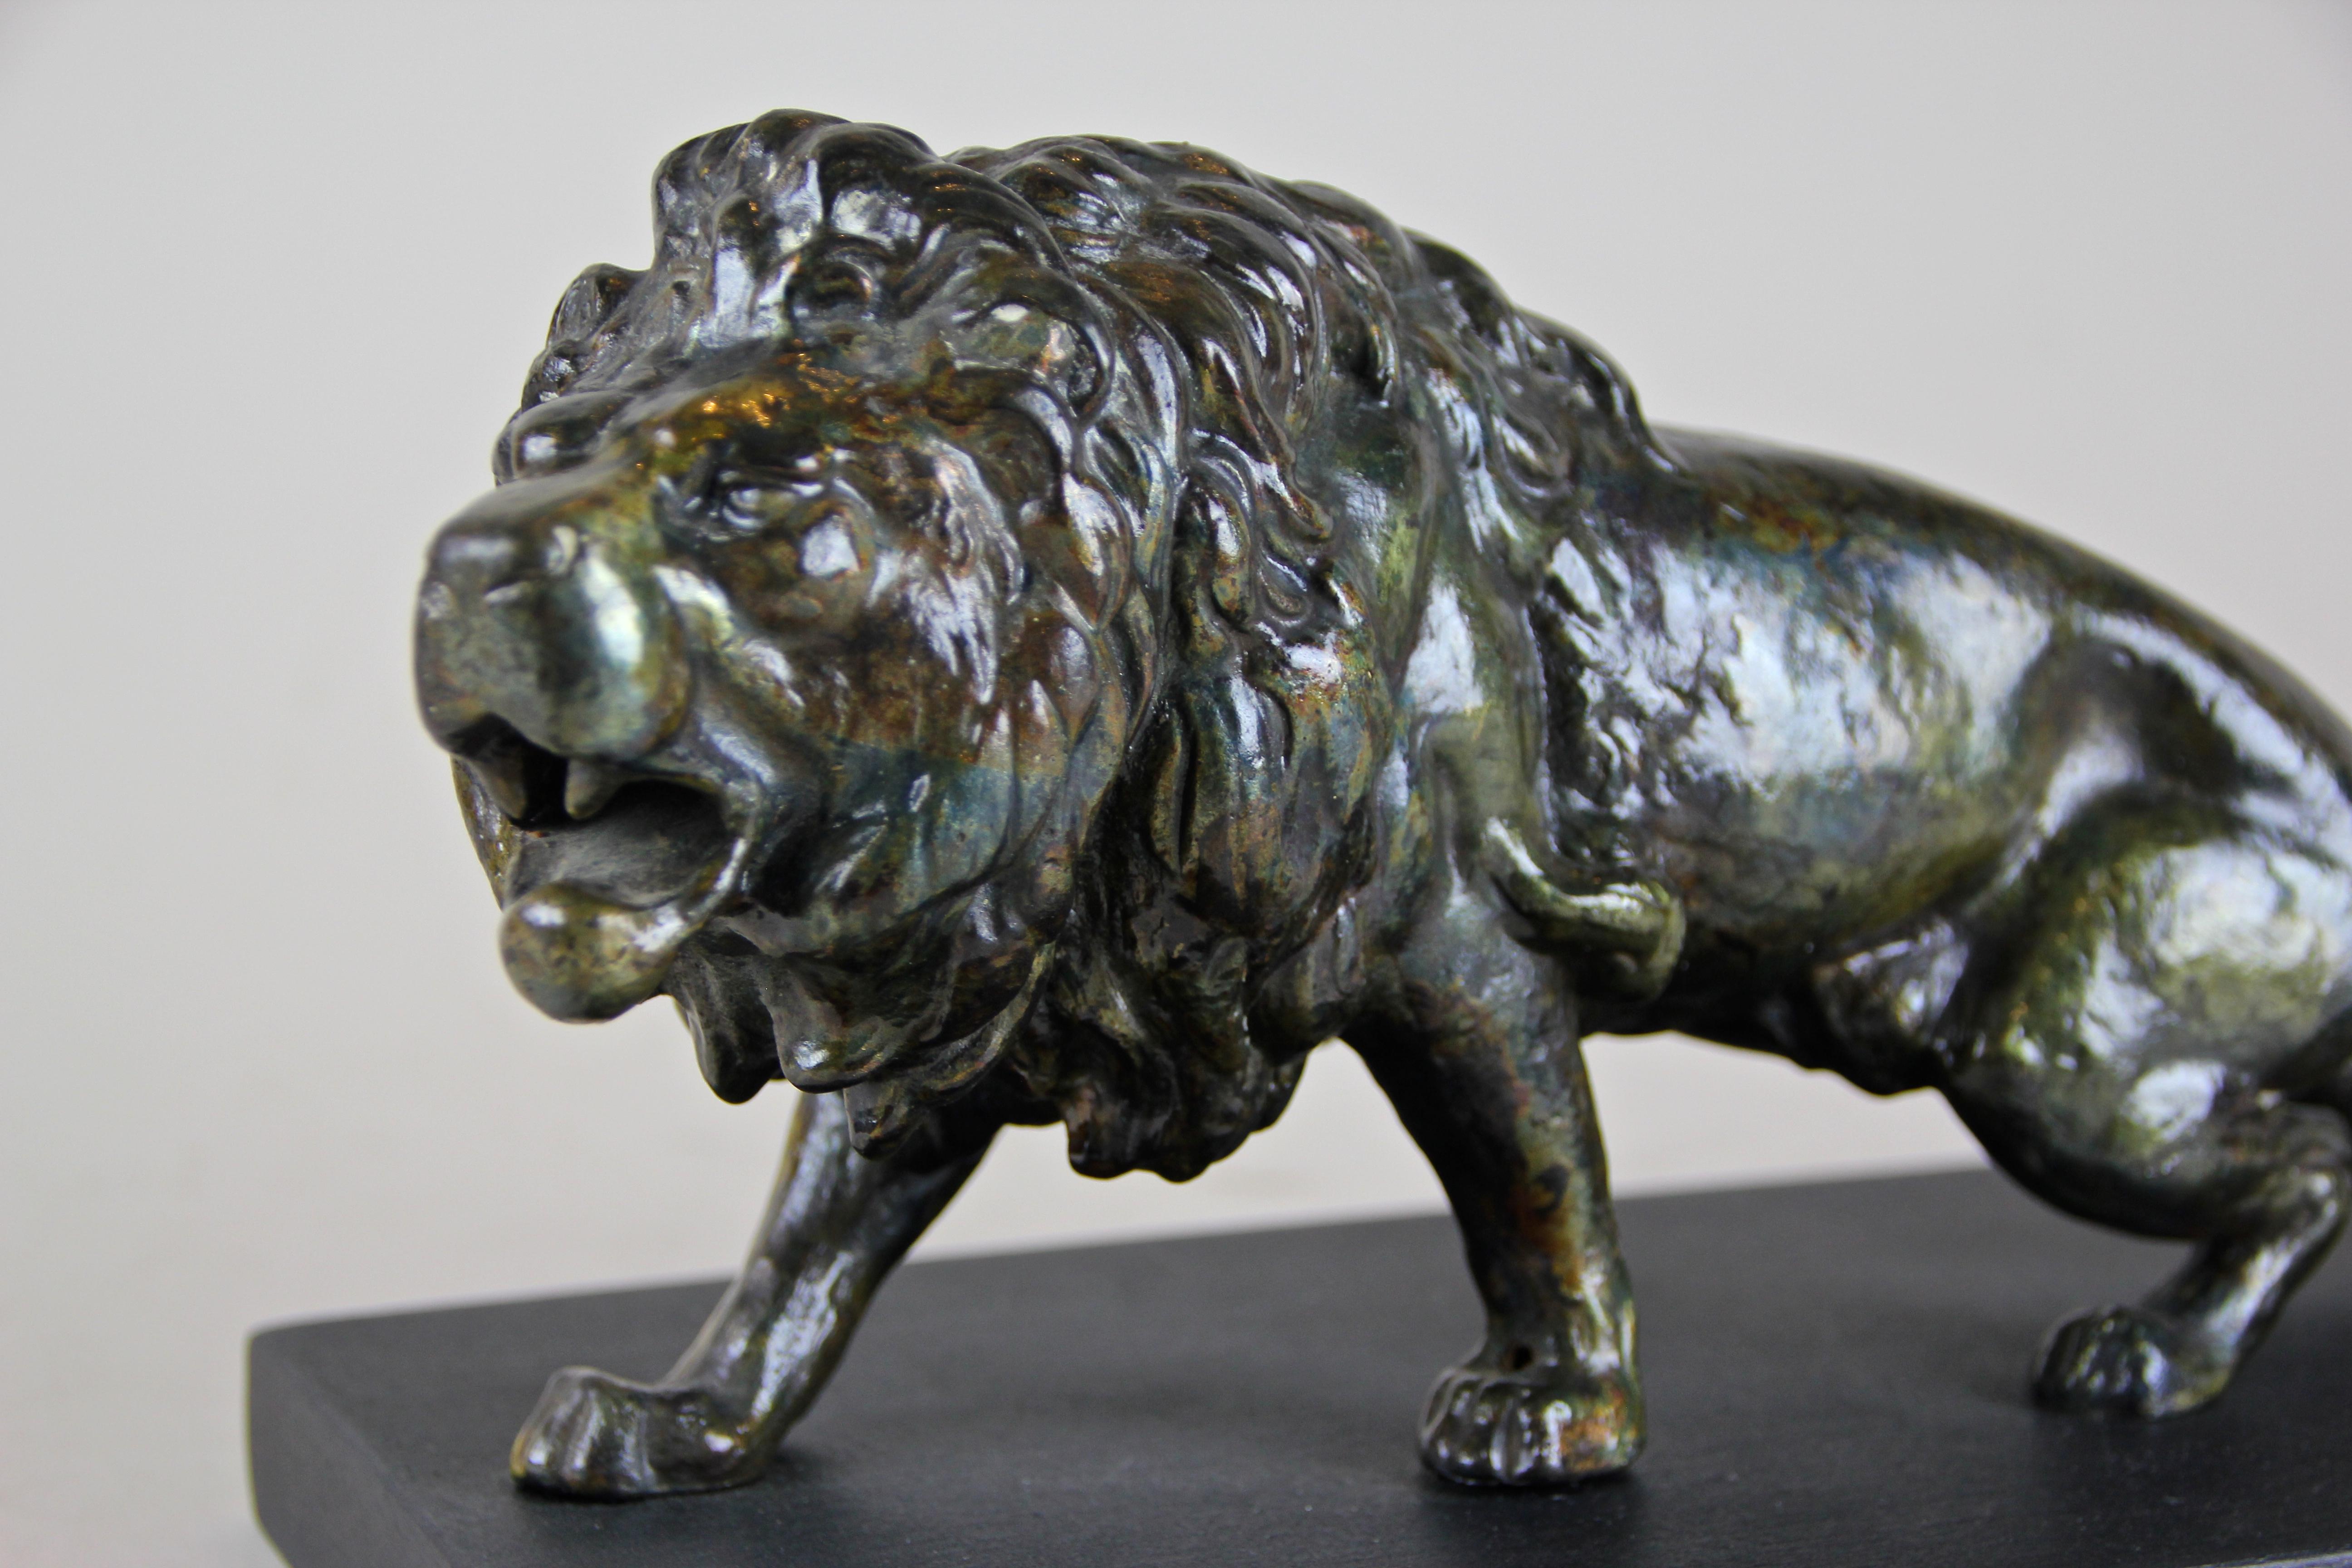 Fine Art Nouveau lion sculpture out of Austria, artfully made of cast steel around the turn of the century. This great depiction of an animal sculpture shows an amazing iridescent patinated surface and provides this decorative lion a very majestic